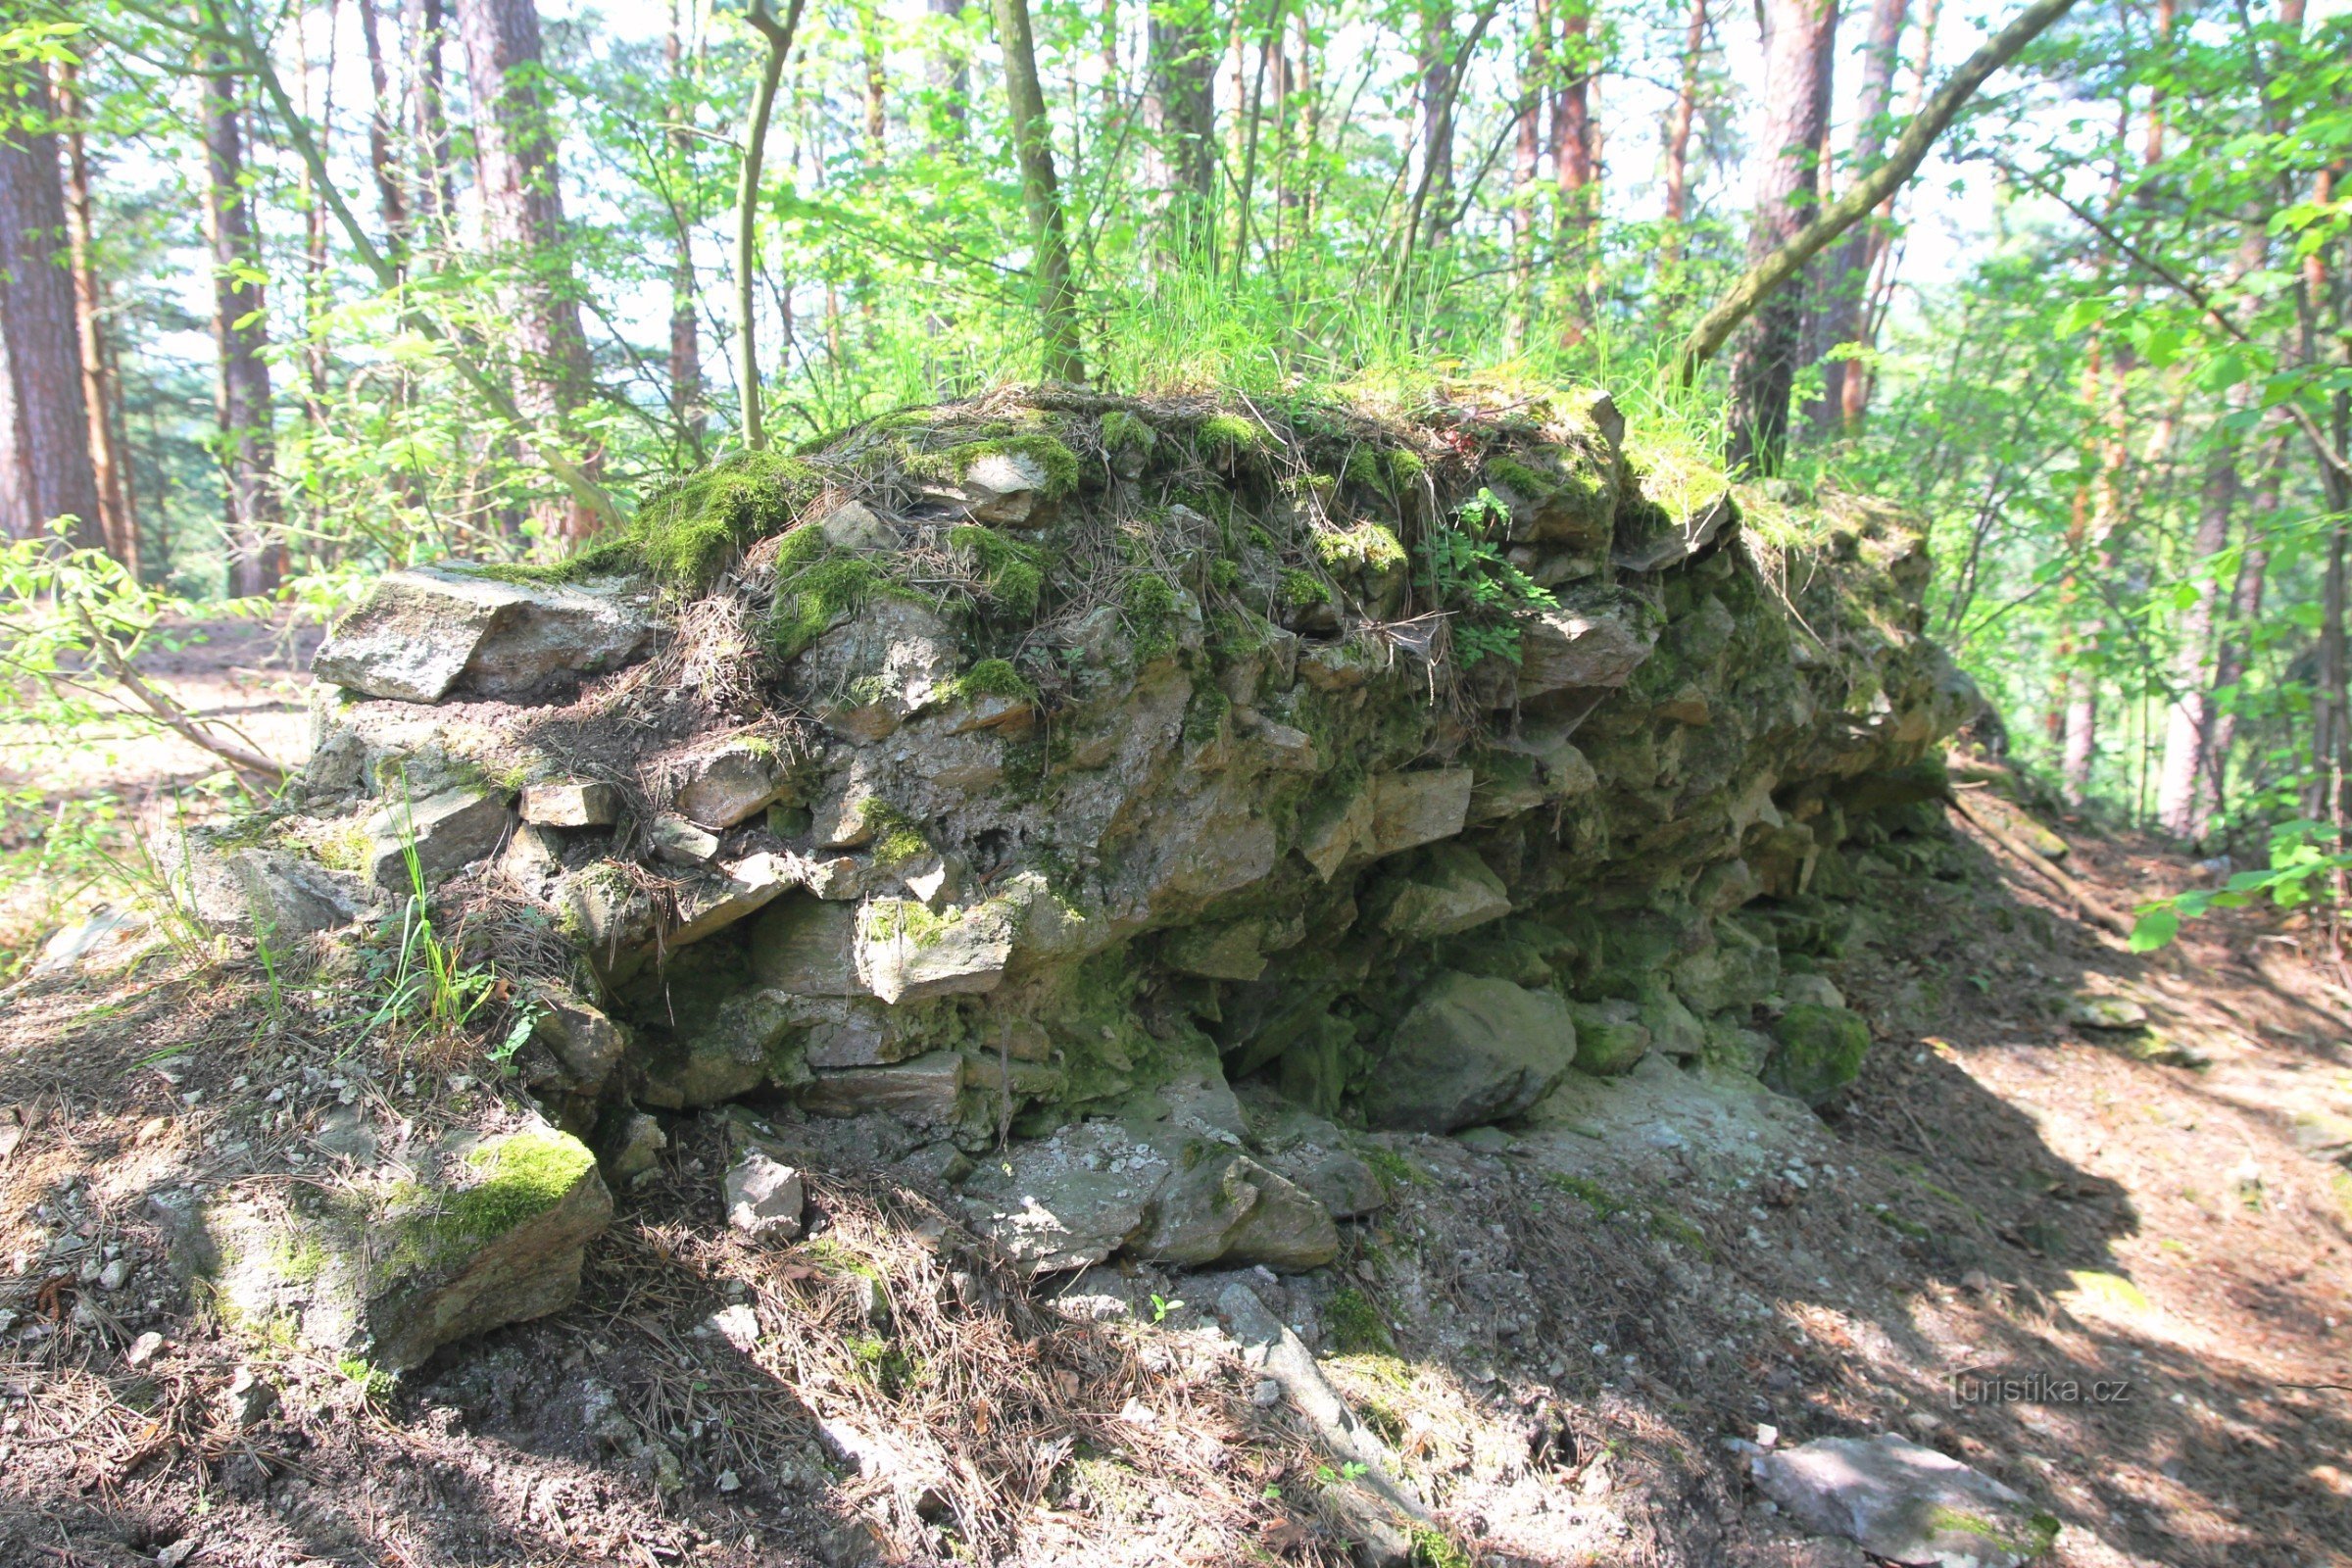 Remains of a stone wall